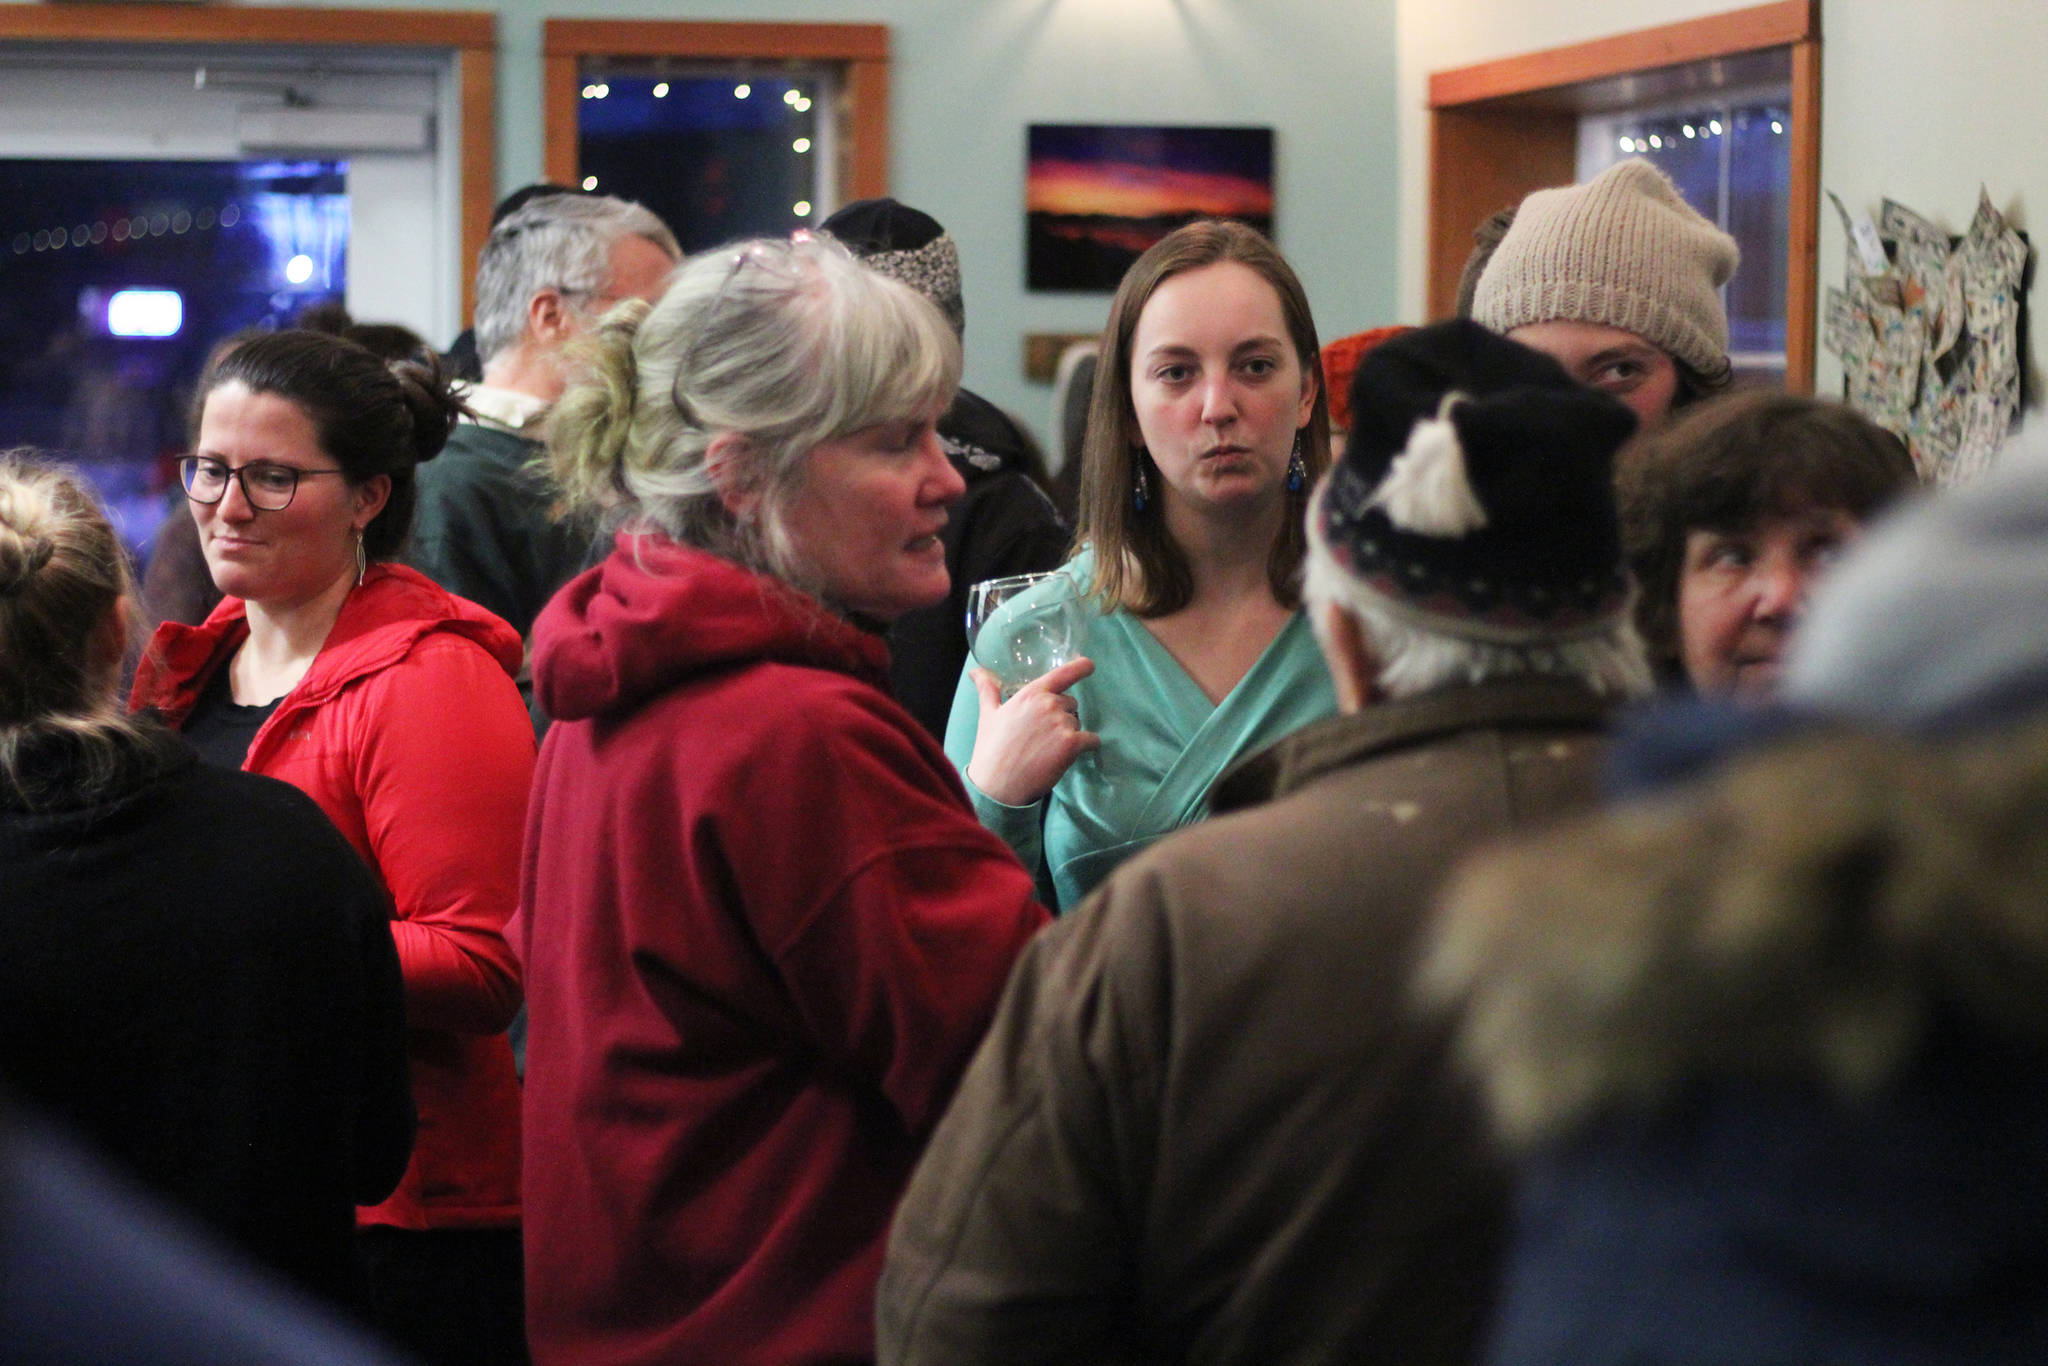 A crowd of people talks and mingles at the First Friday opening Friday, Feb. 1, 2019 at Grace Ridge Brewery in Homer, Alaska. The winning label for a special Brackish Brown ale was unveiled at the event. (Photo by Megan Pacer/Homer News)